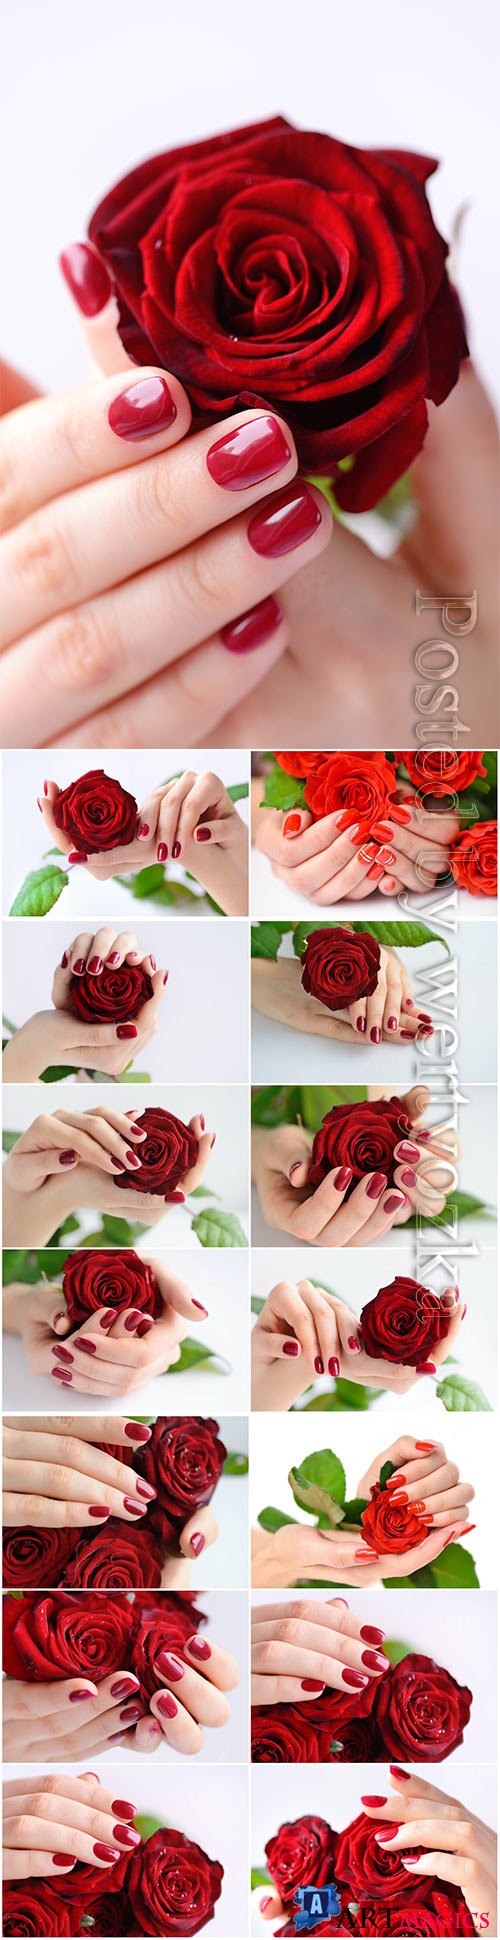 Manicure, female hands with a rose beautiful stock photo